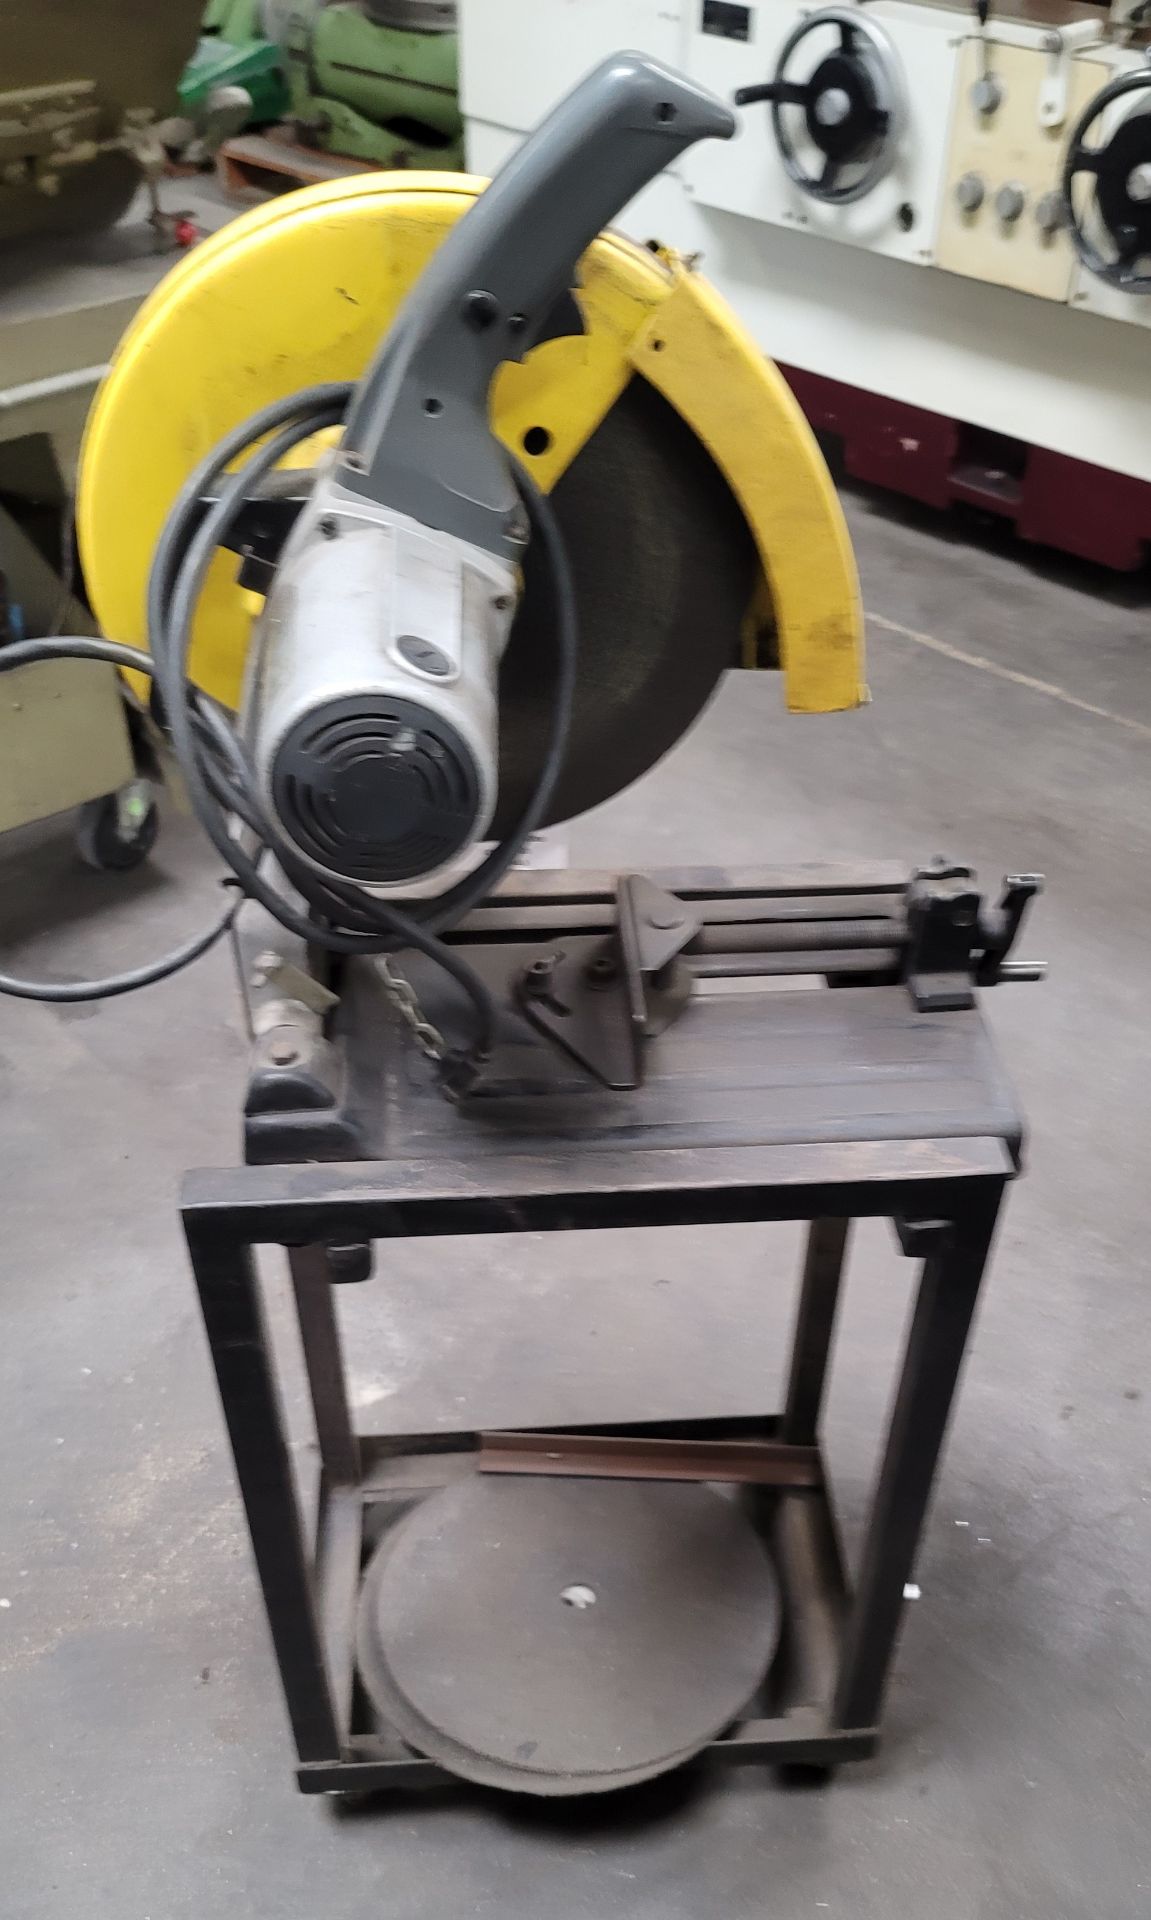 CHICAGO ELECTRIC 14" CUT-OFF SAW, W/ STAND - Image 2 of 2